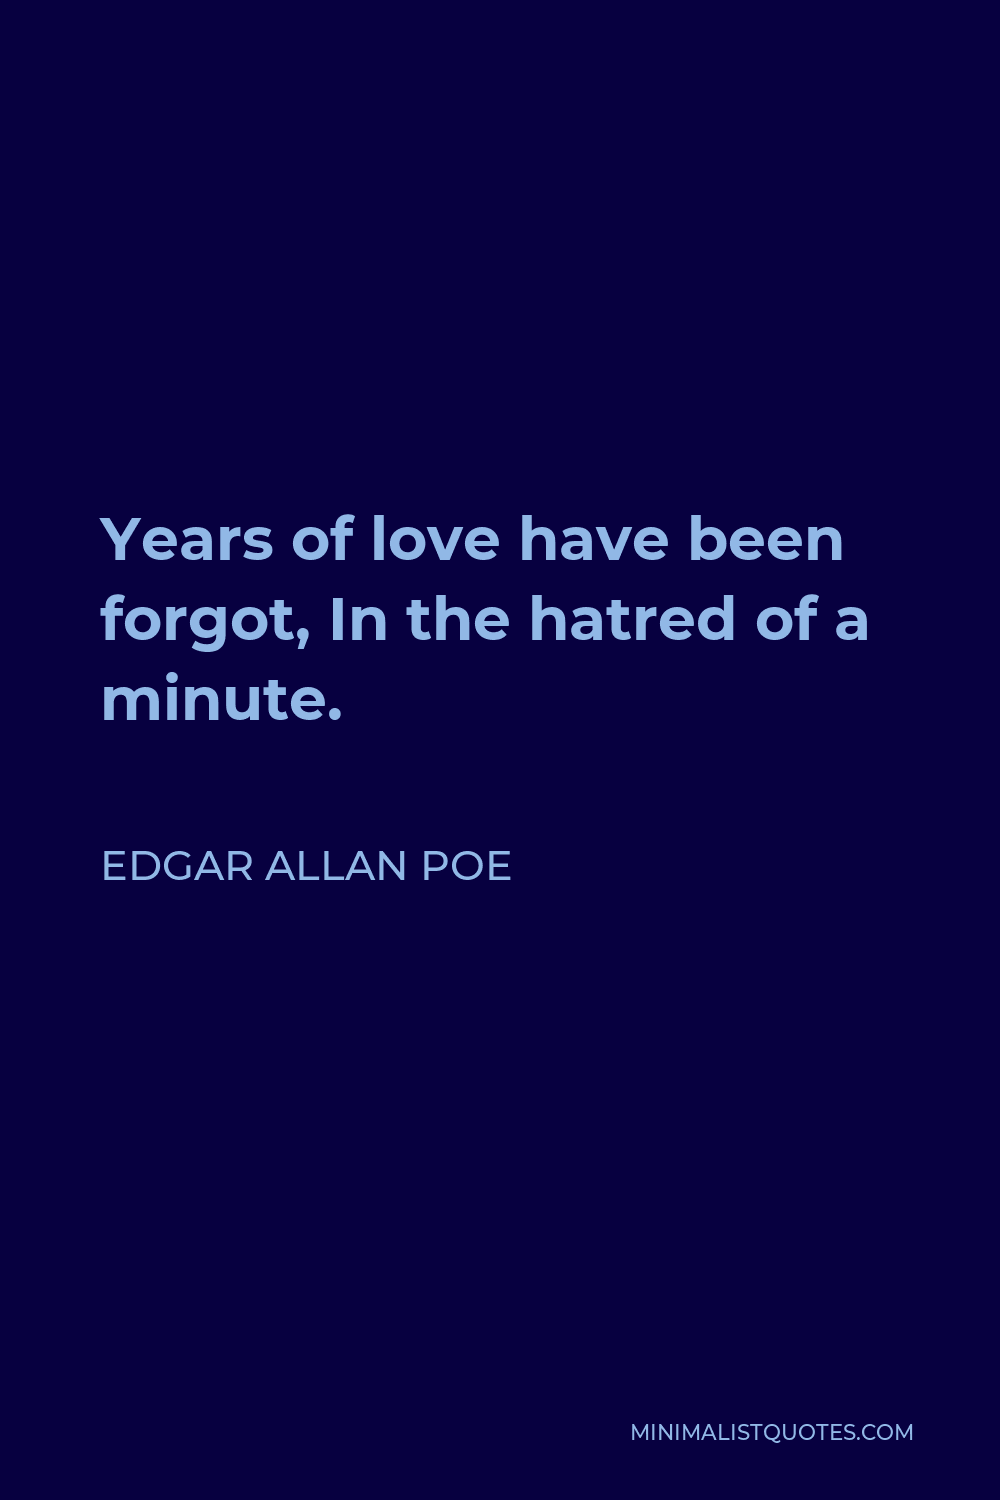 Edgar Allan Poe Quote - Years of love have been forgot, In the hatred of a minute.